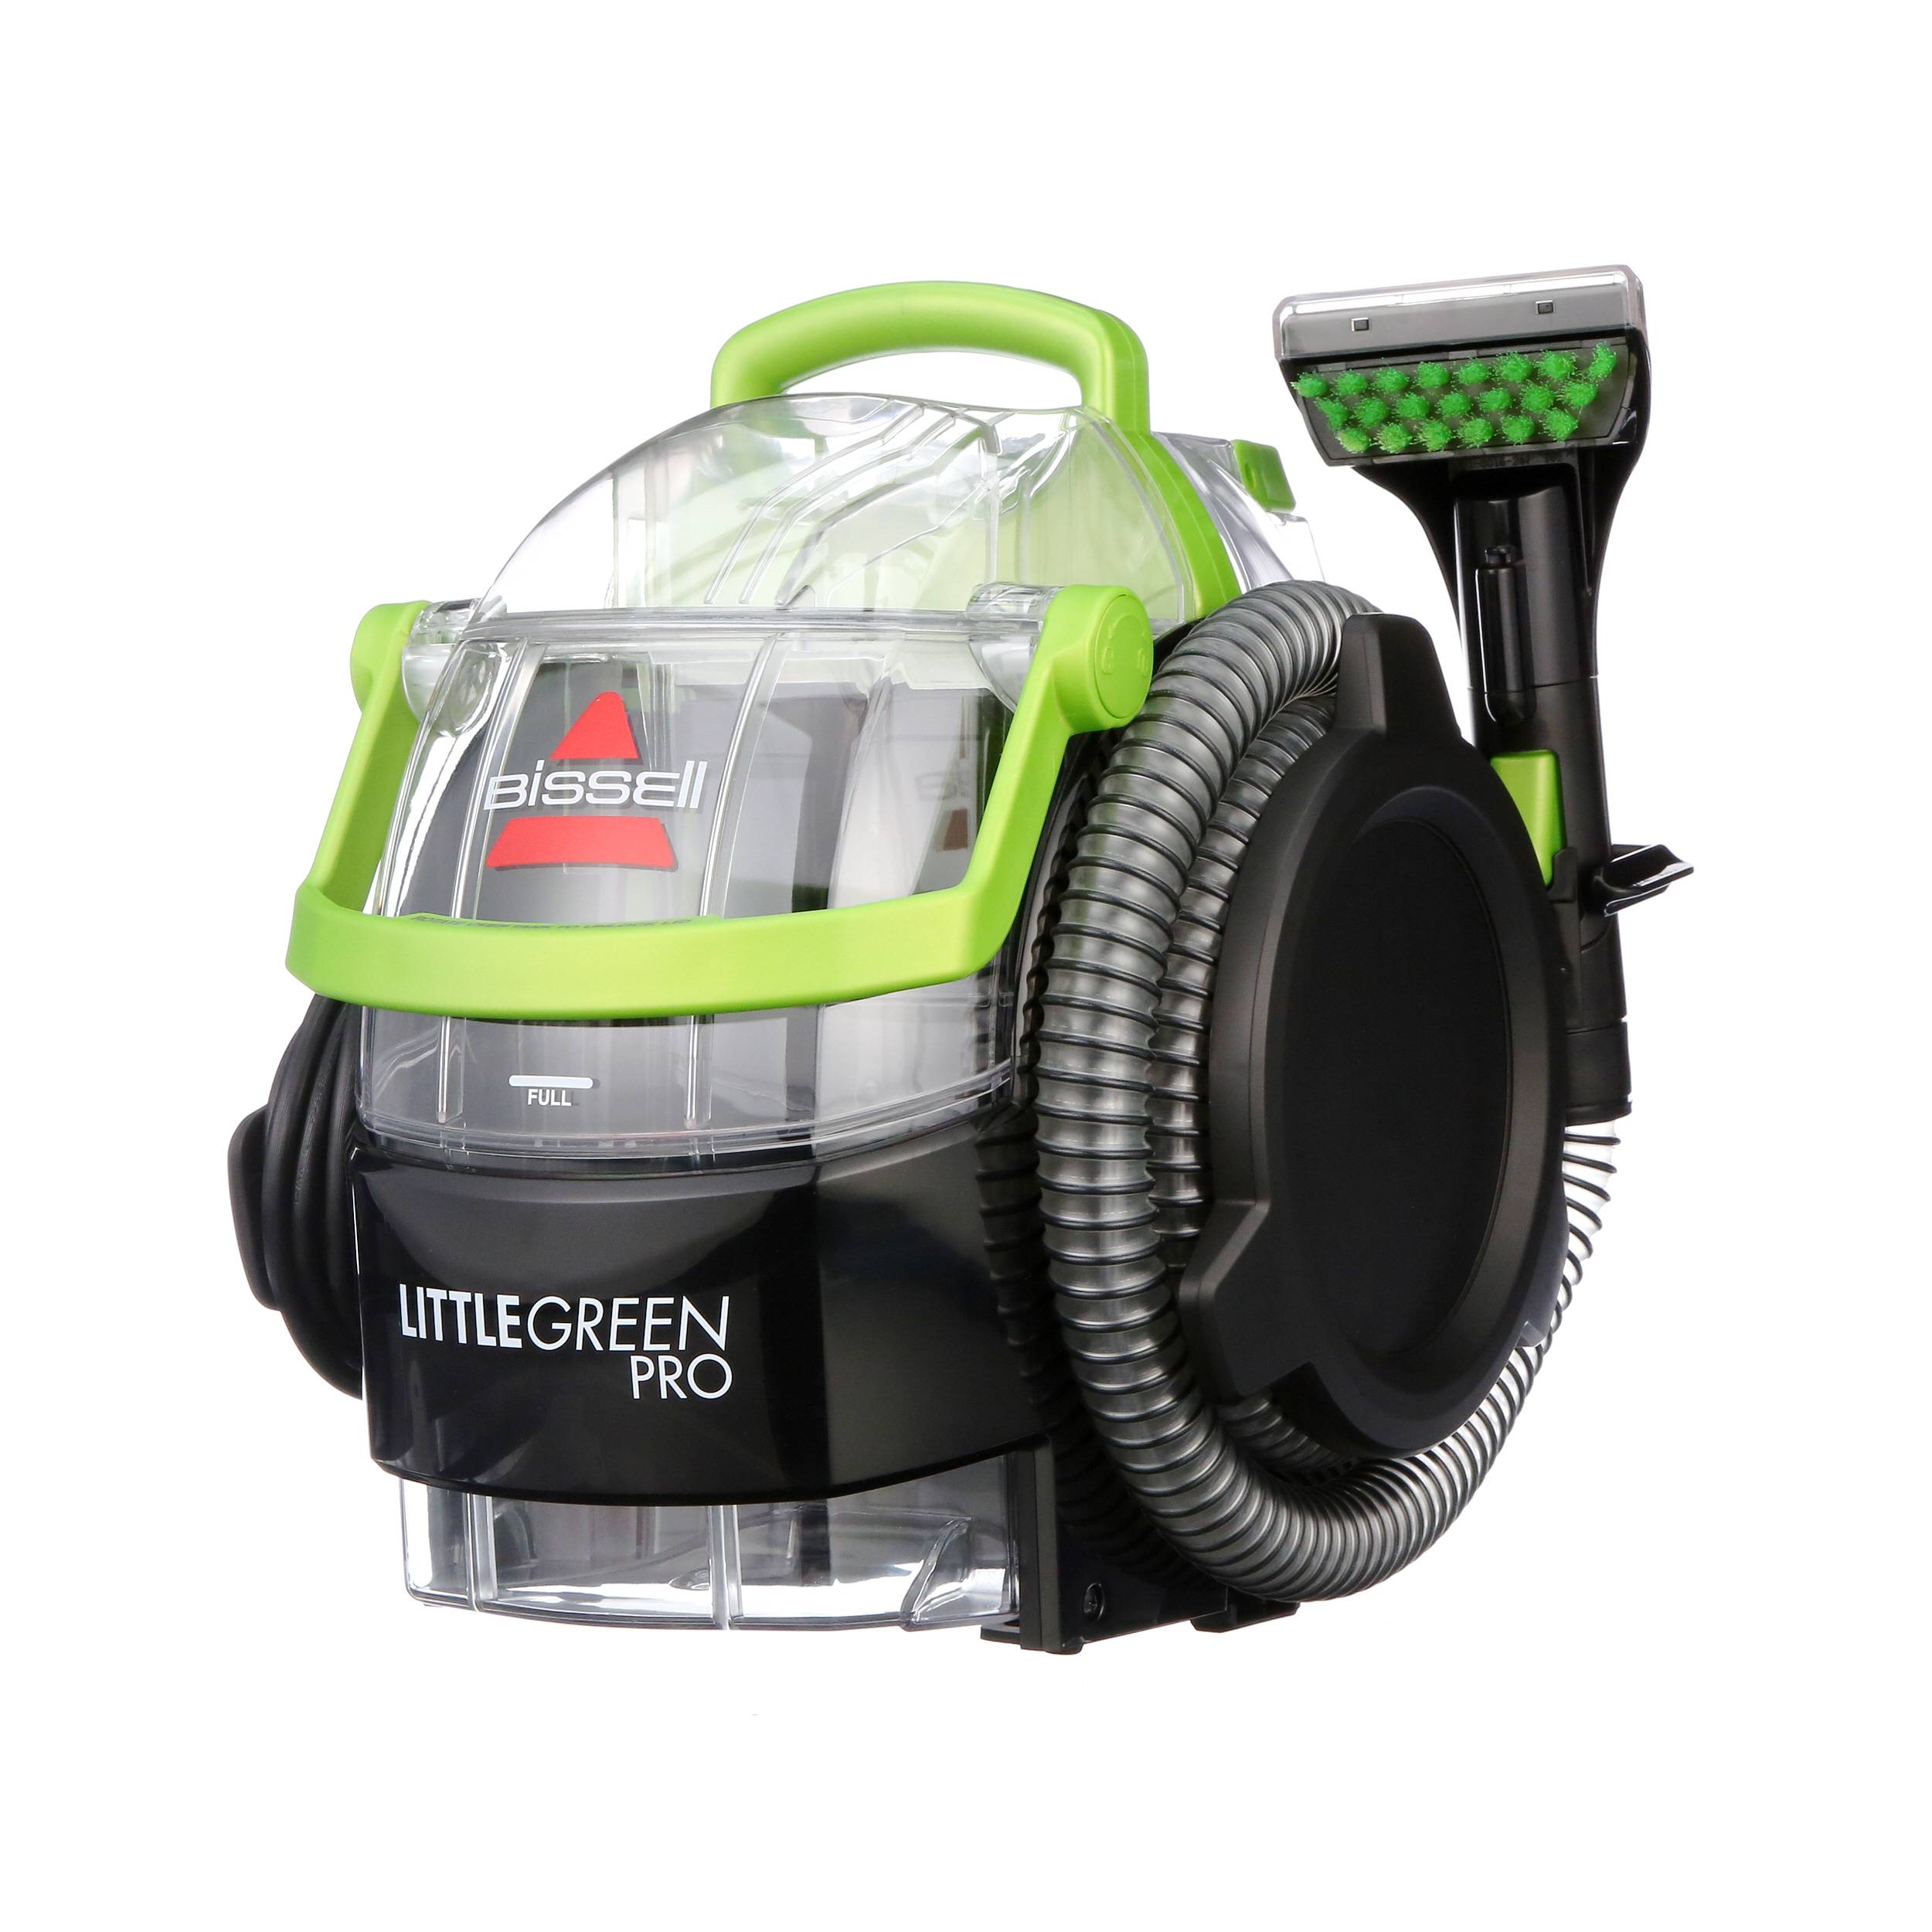 BISSELL Little Green Pet Pro Portable CarpetCleaner